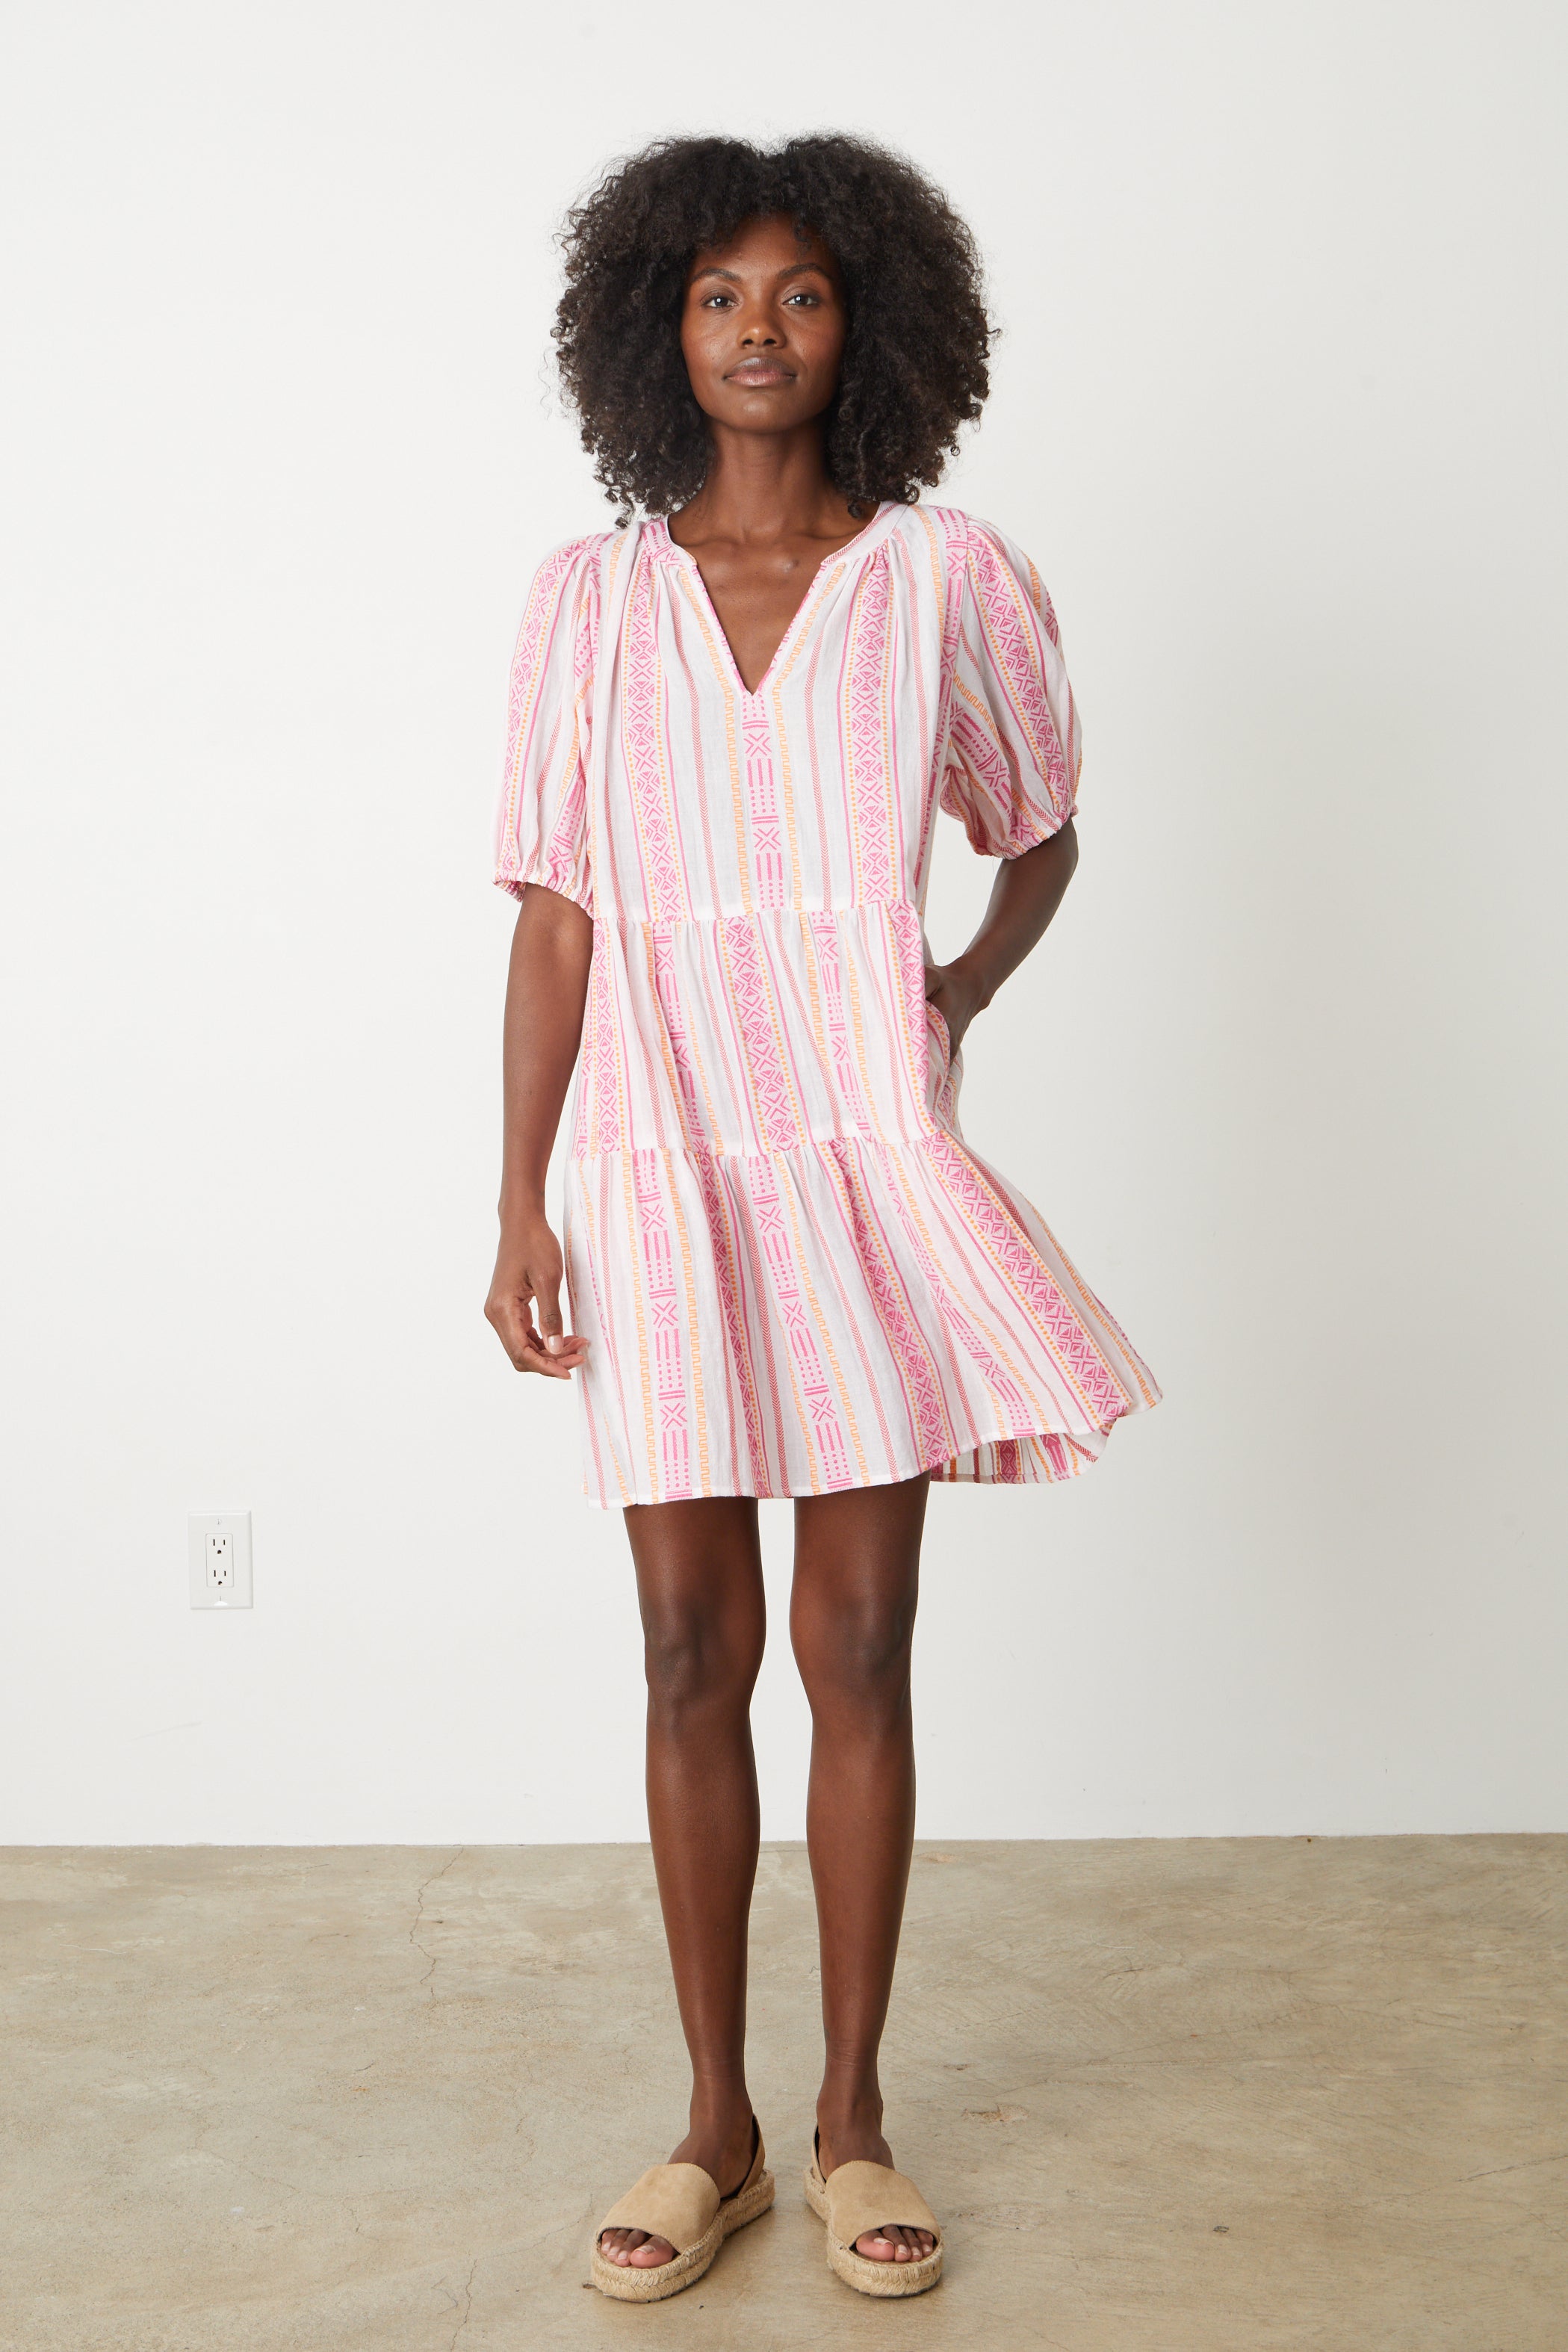   A woman wearing the MONIQUE JACQUARD BOHO DRESS by Velvet by Graham & Spencer, a pink and white striped jacquard print dress. 